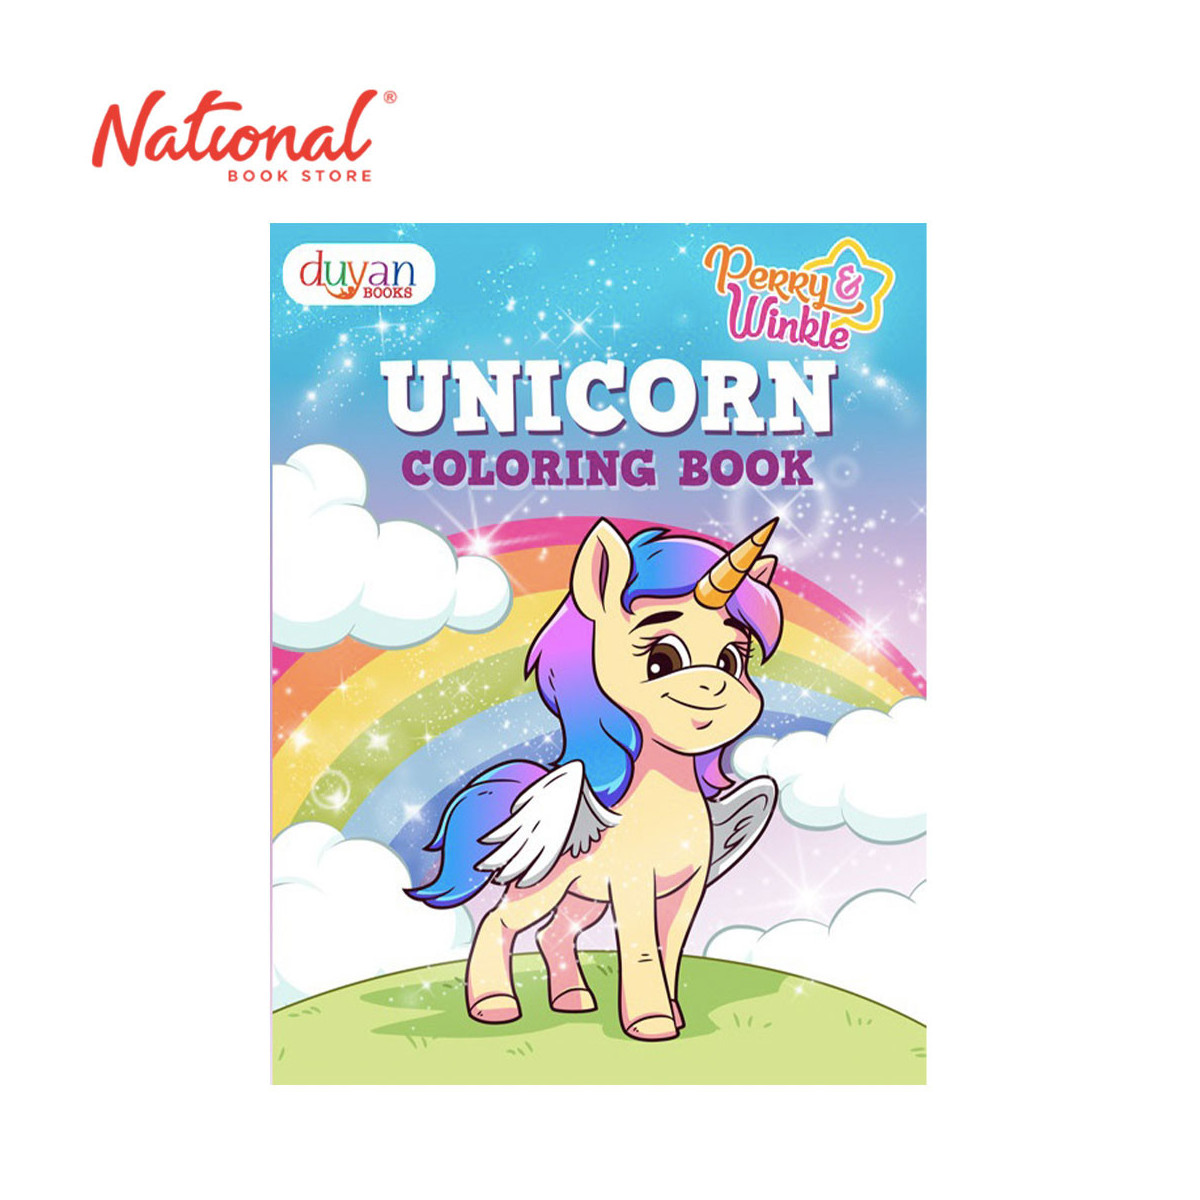 Unicorn Coloring Book - Trade Paperback - Activity Books for Kids